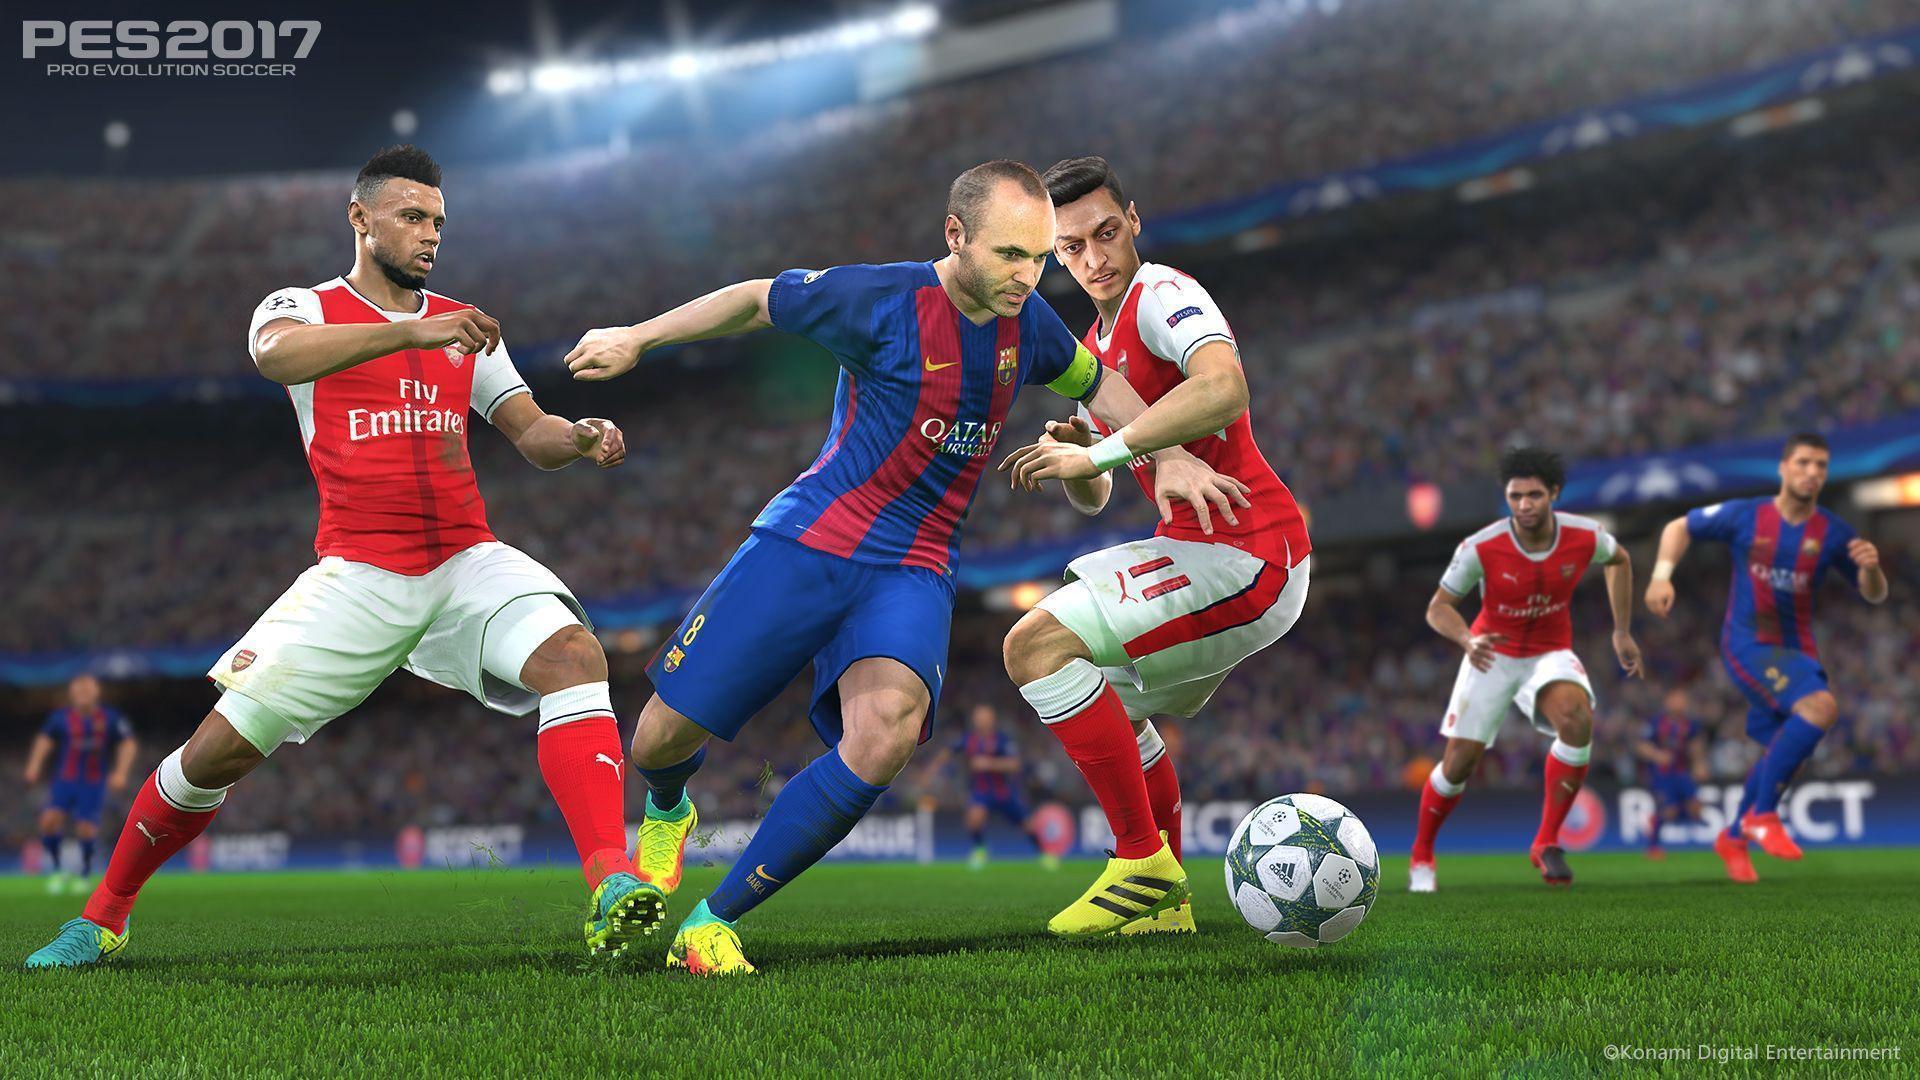 Pes17 wallpaper picture free download